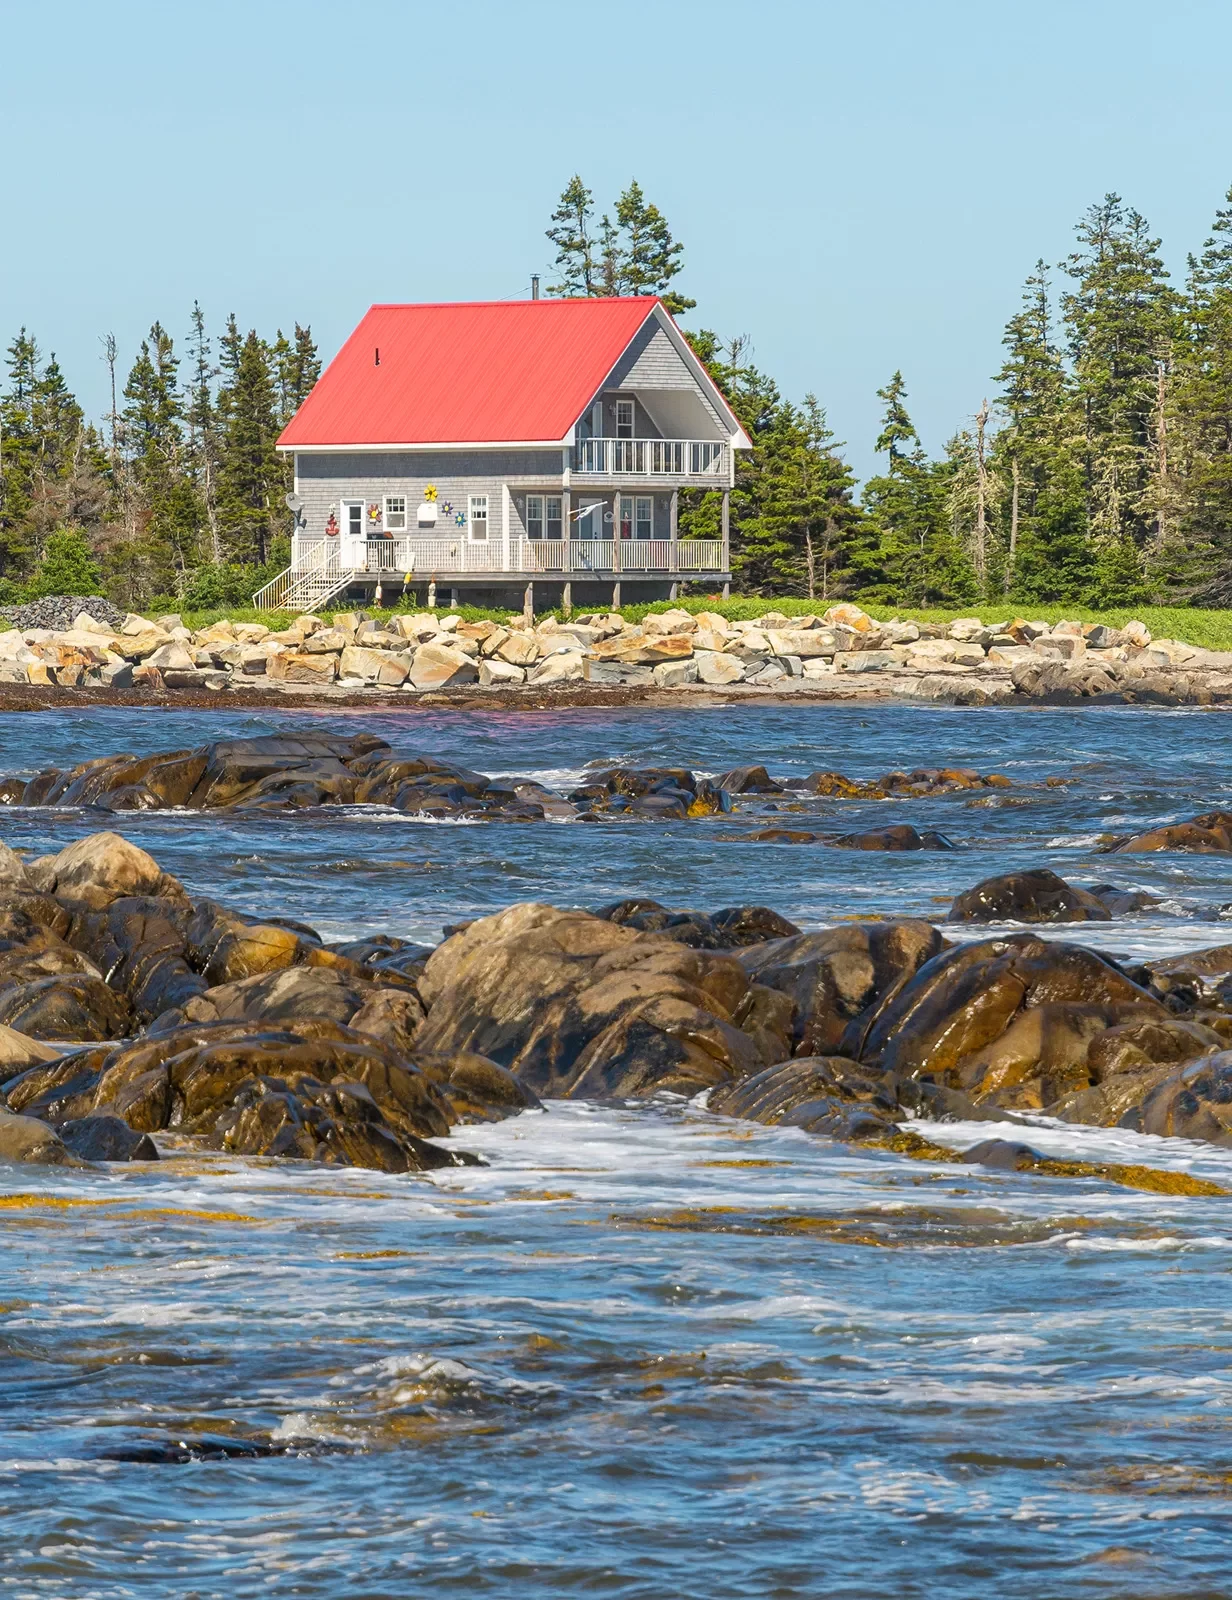 Rocky ocean shore in foreground, two-story fishing house in background.